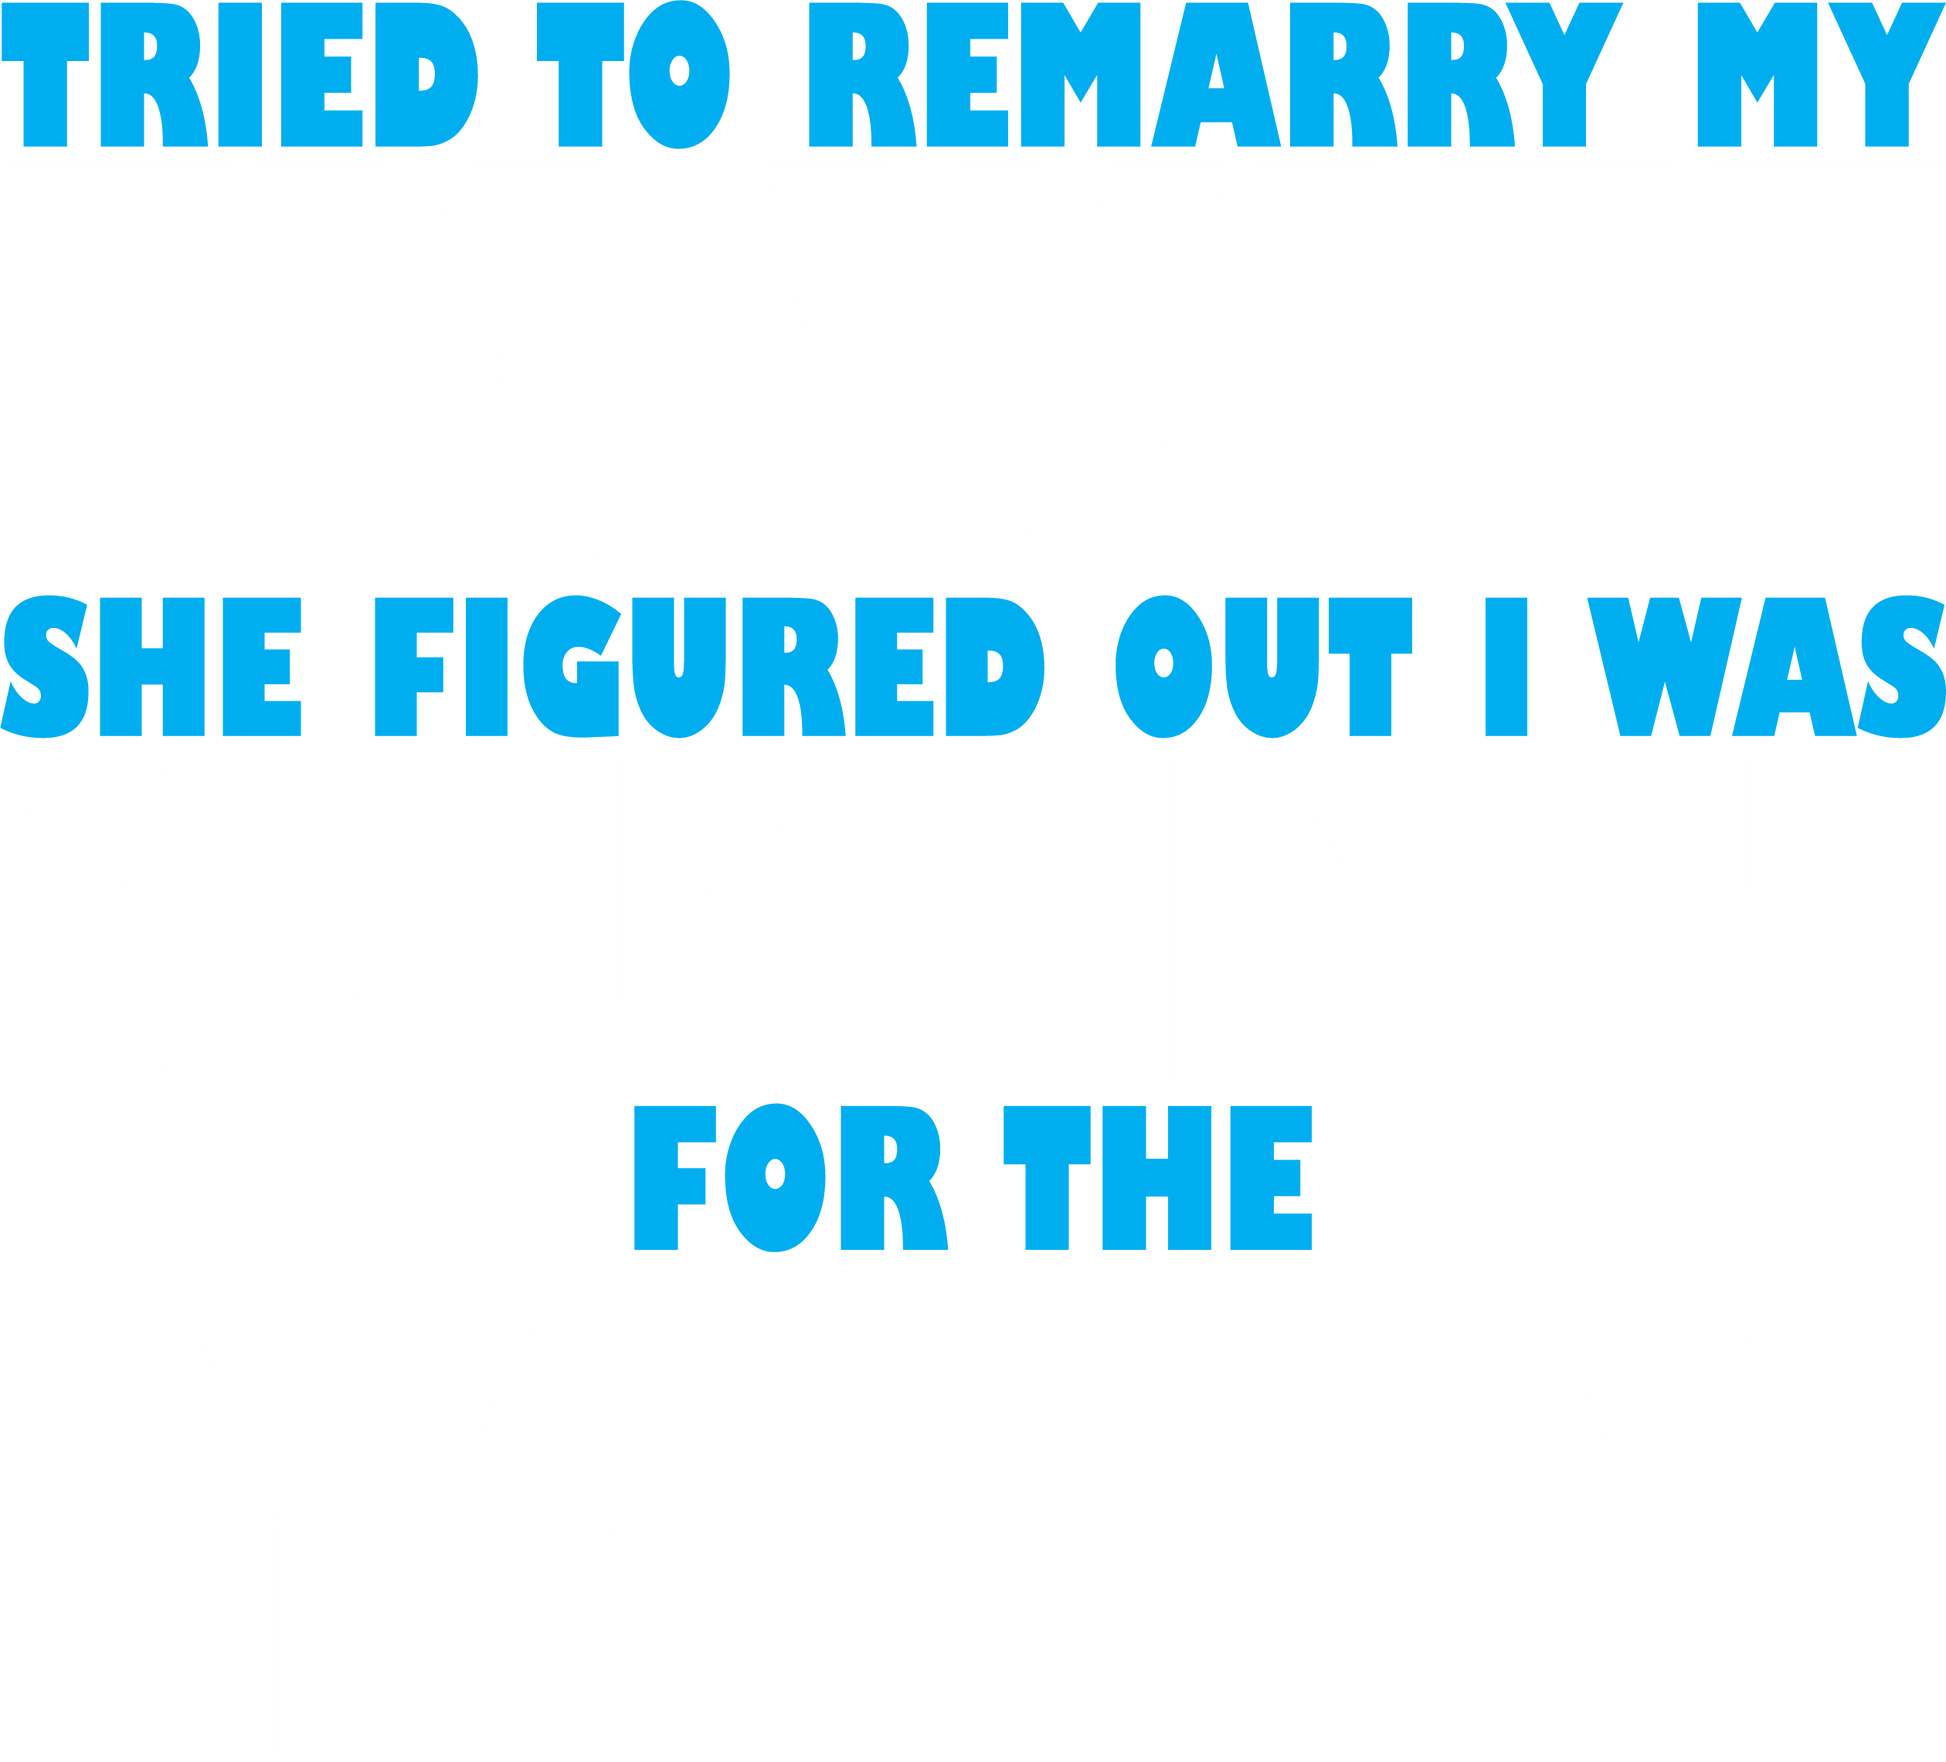 Funny T-Shirts design "Tried to Remarry my Ex-Wfe, She Figured Out I was Only in it for the Money"